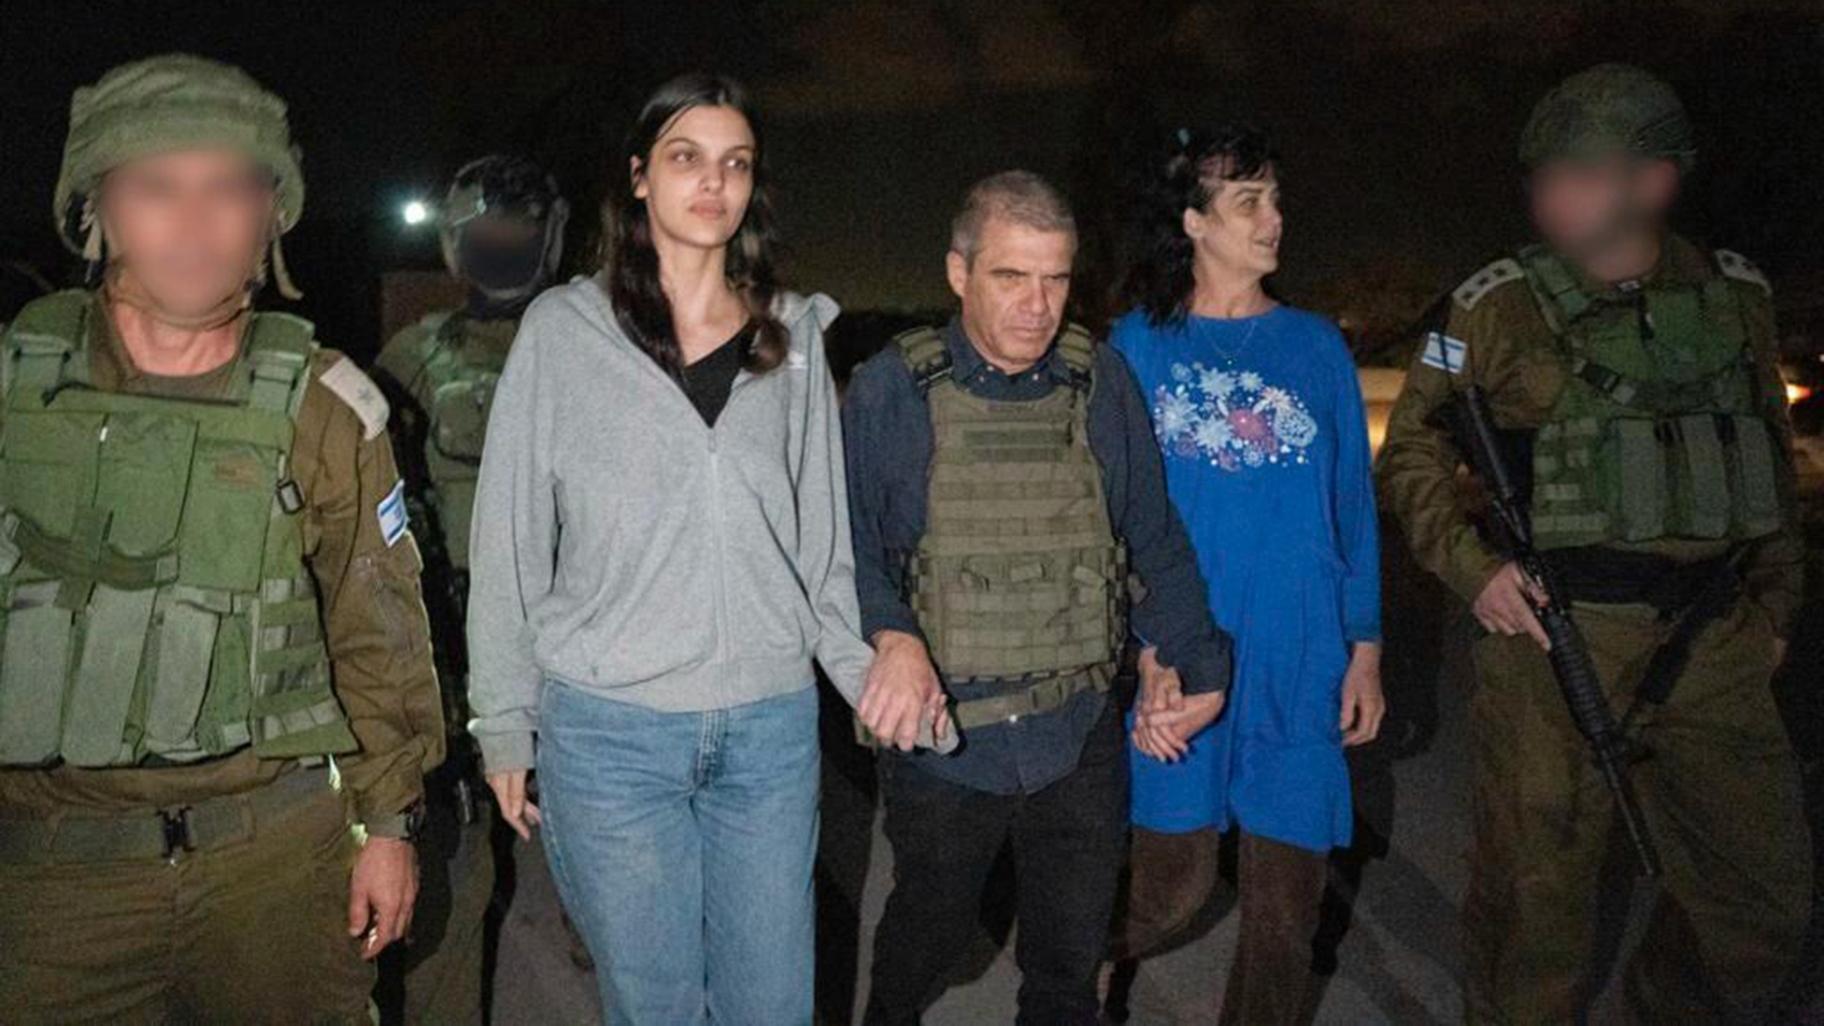 In this photo provided by the Government of Israel, Judith Raanan, right, and her 17-year-old daughter Natalie are escorted by Israeli soldiers and Gal Hirsch, Prime Minister Benjamin Netanyahu's special coordinator for returning the hostages, as they return to Israel from captivity in the Gaza Strip, Friday, Oct. 20, 2023. (Government of Israel via AP Photo)